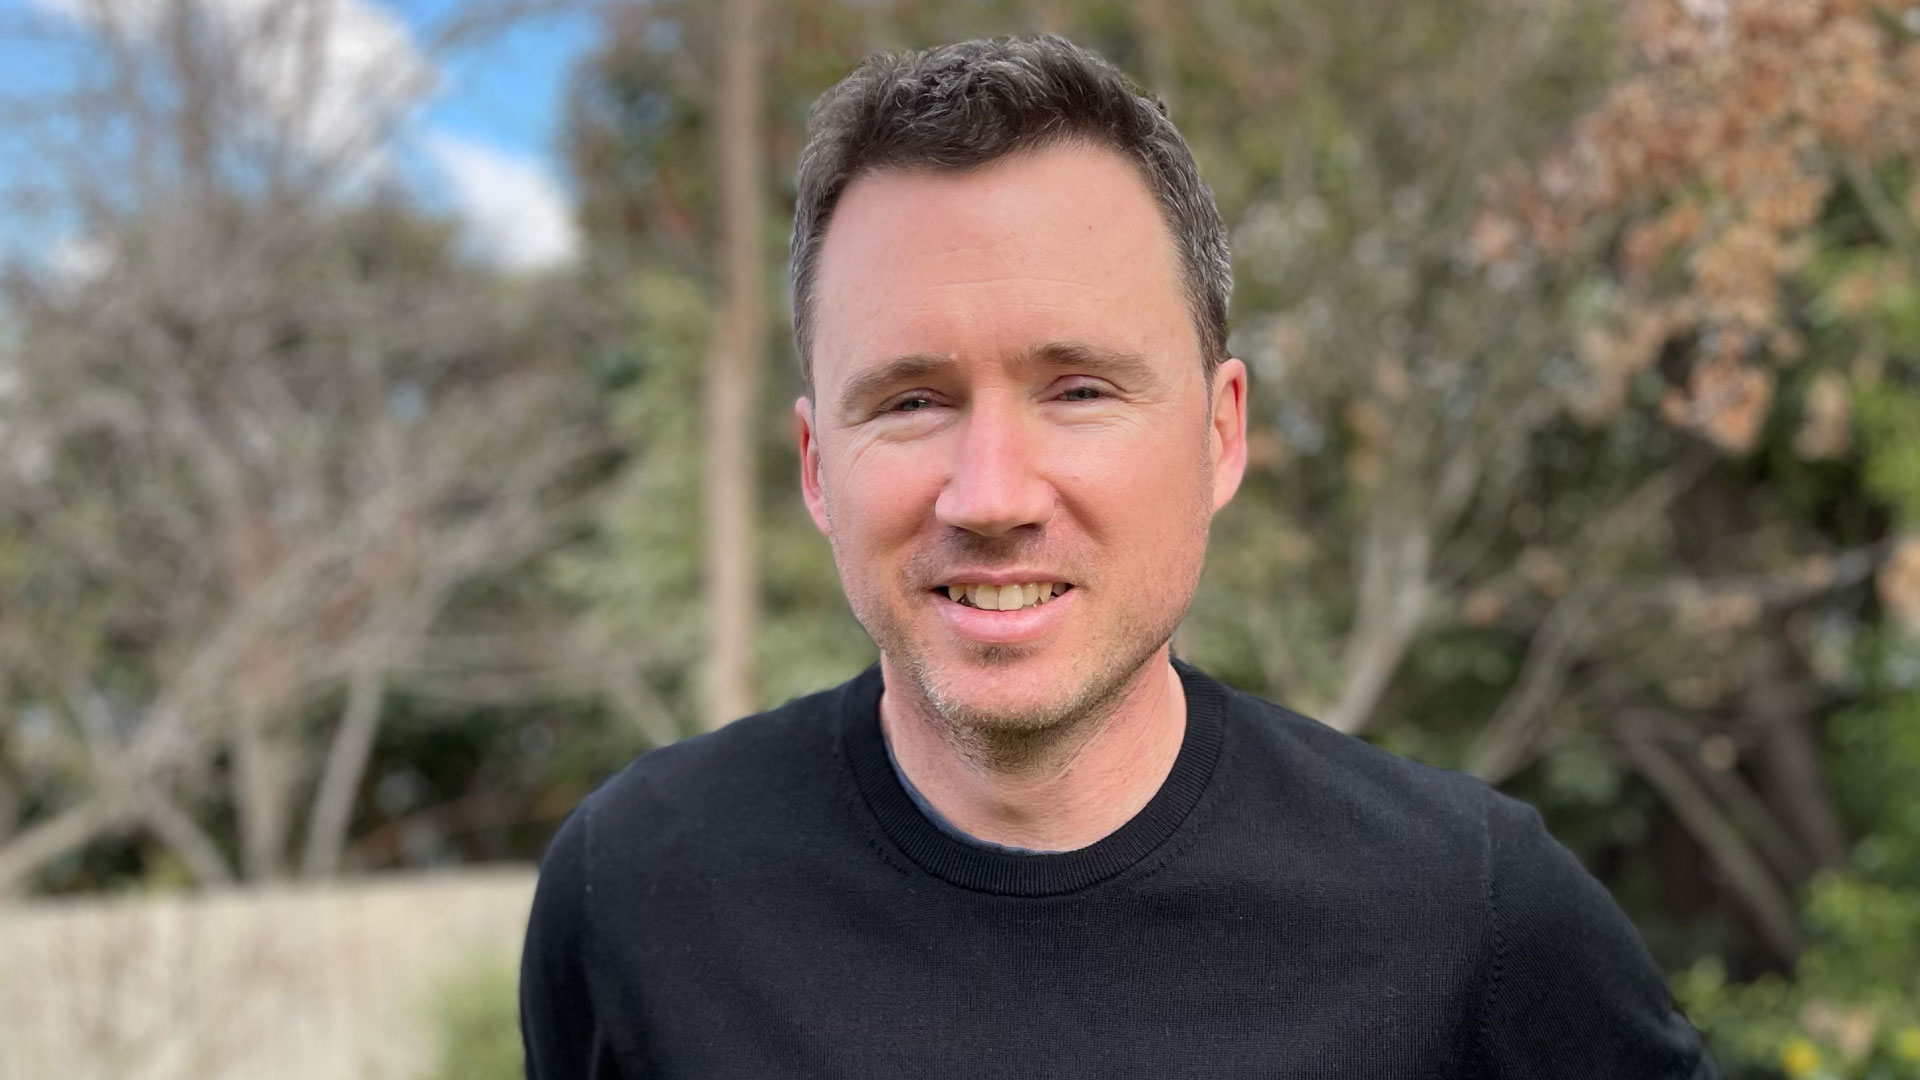 Photo of Brett Matson wearing a black jumper and standing in a garden. Next to him is the text: "People are capable of much more than their current role description and they just need an opportunity to try".